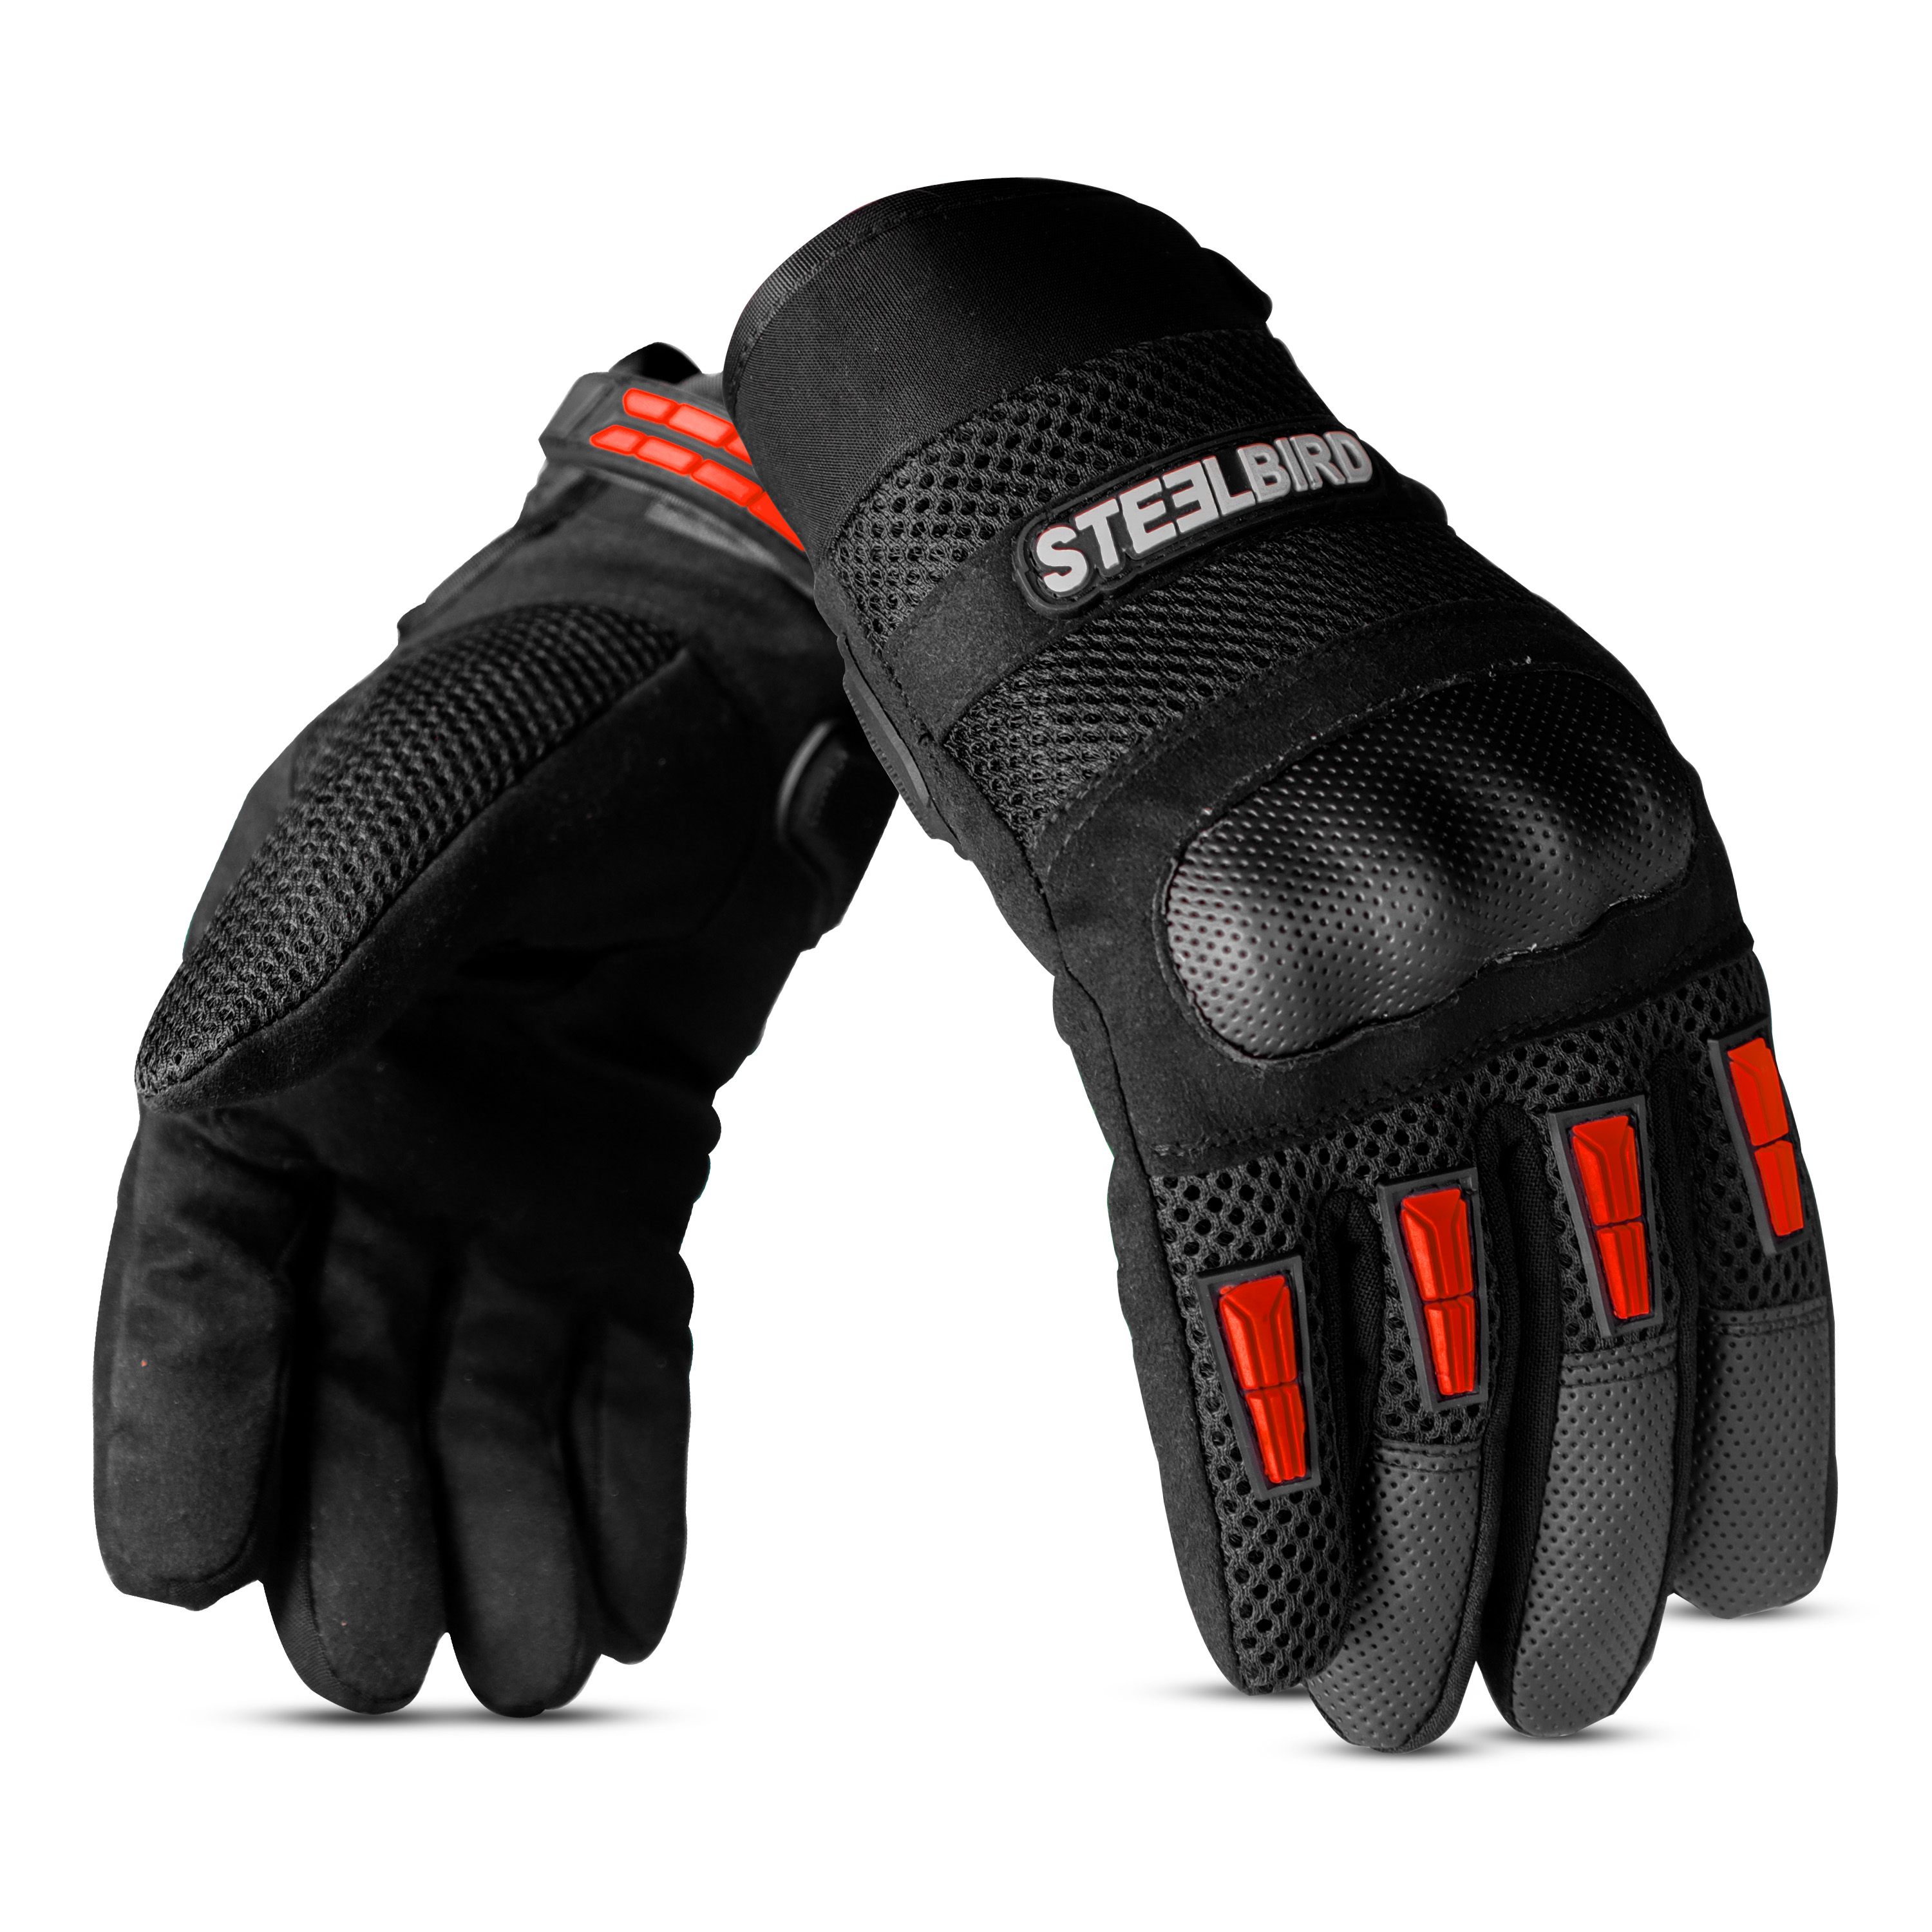 Steelbird Khardungla Full Finger Bike Riding Gloves With Touch Screen Sensitivity At Thumb And Index Finger, Protective Off-Road Motorbike Racing (Red)